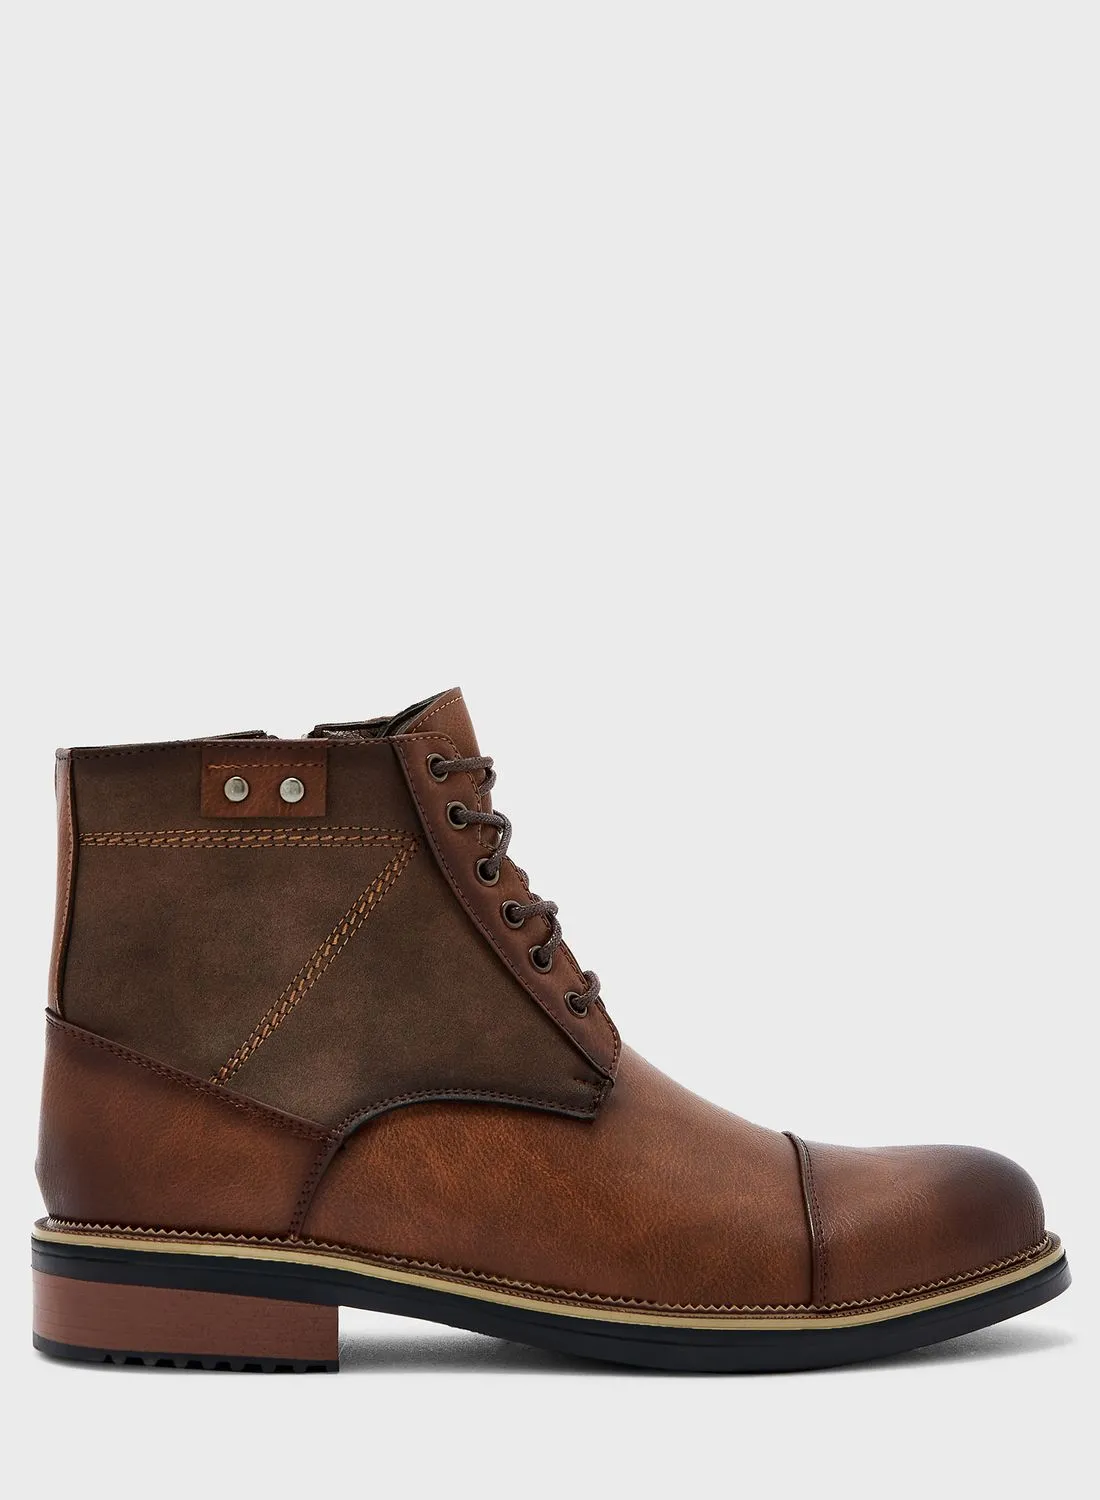 Robert Wood Casual Welted Boots